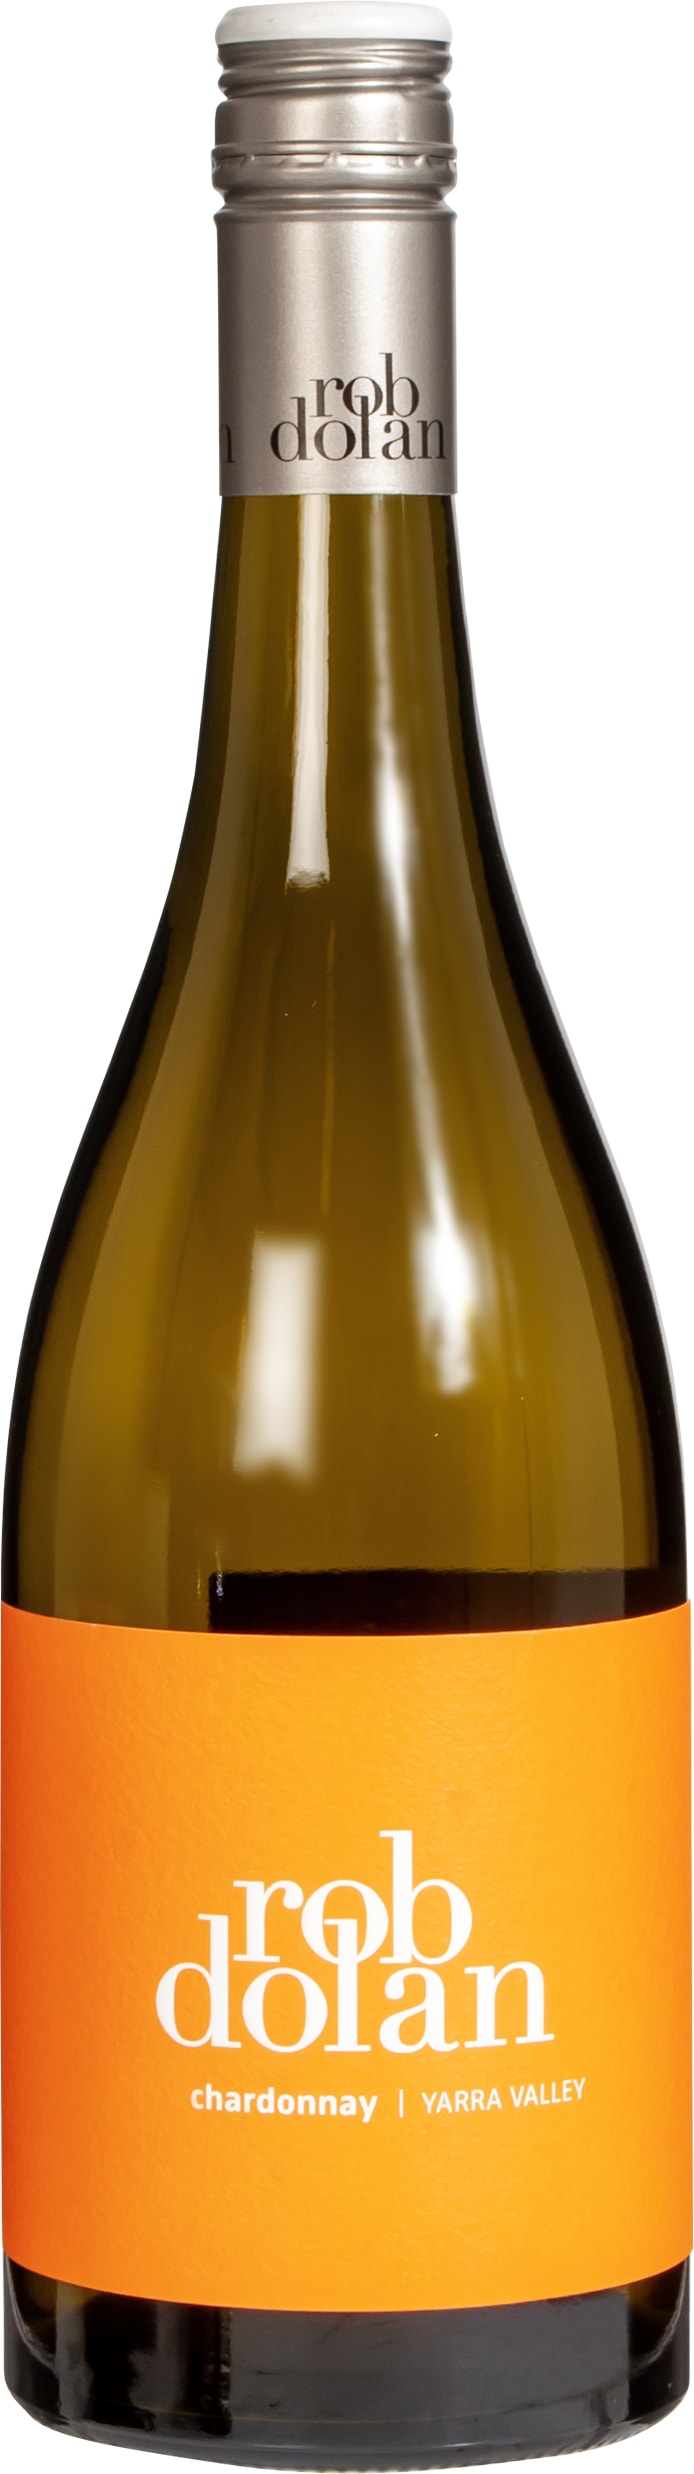 Rob Dolan Chardonnay 2021 75cl - Buy Rob Dolan Wines from GREAT WINES DIRECT wine shop